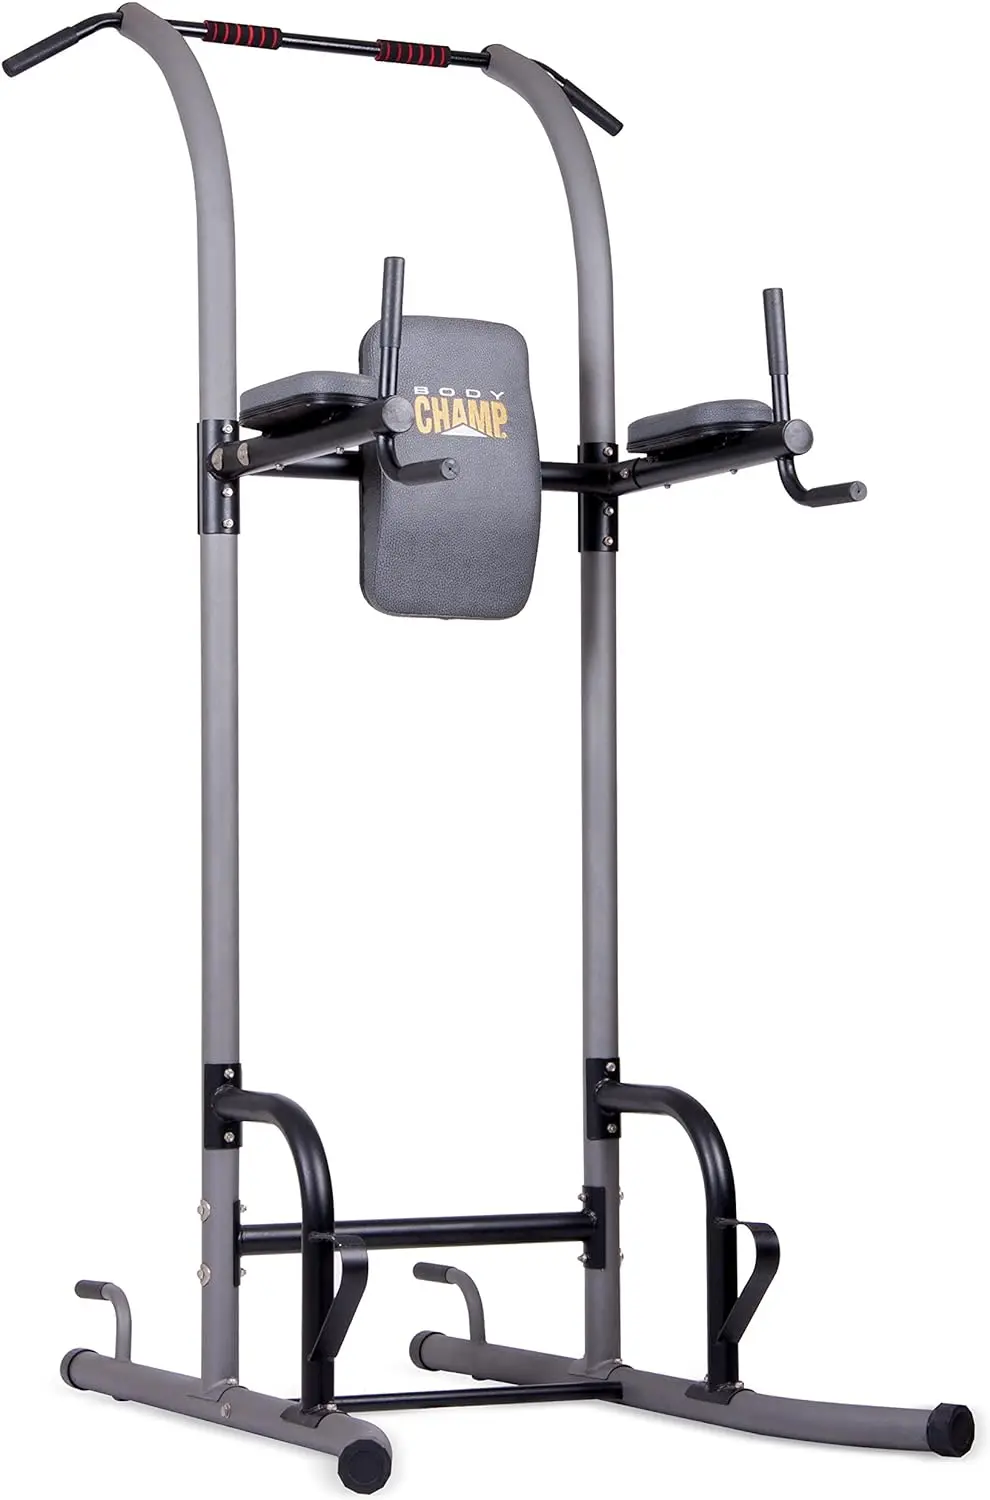 

Pull Up Bar, Exercise Equipment, Home Gym Power Tower, Power Station for Pull Ups, Push Ups, Vertical Knee and Leg Raises and Di